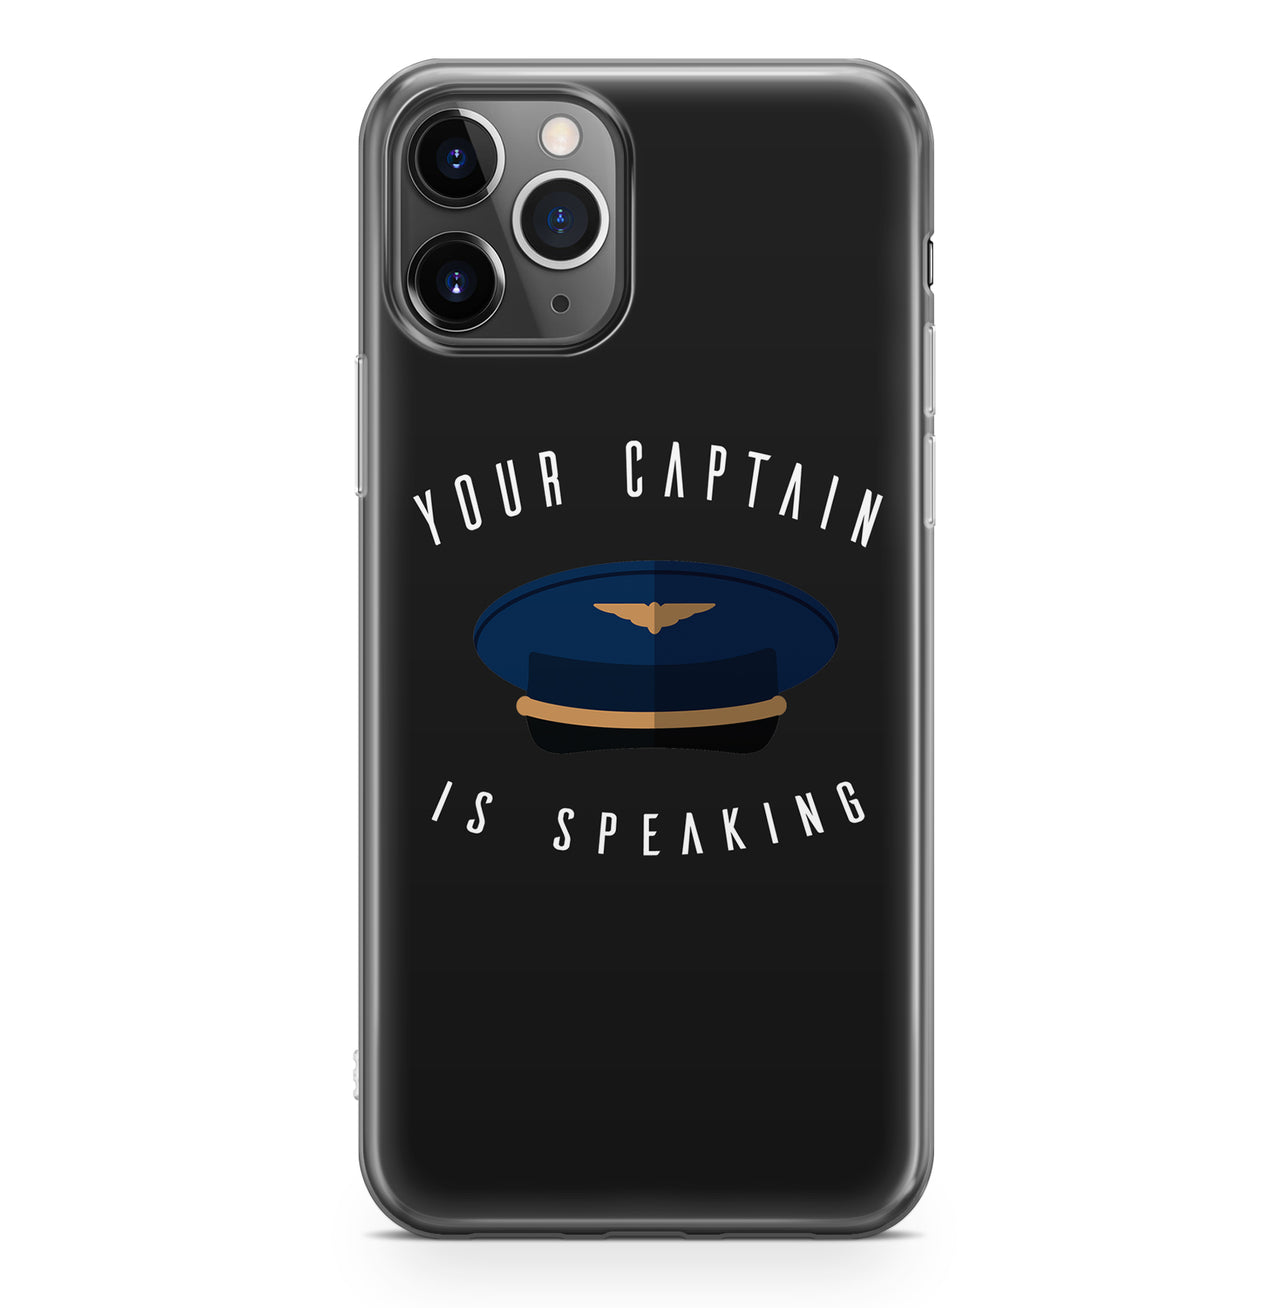 Your Captain Is Speaking Designed iPhone Cases